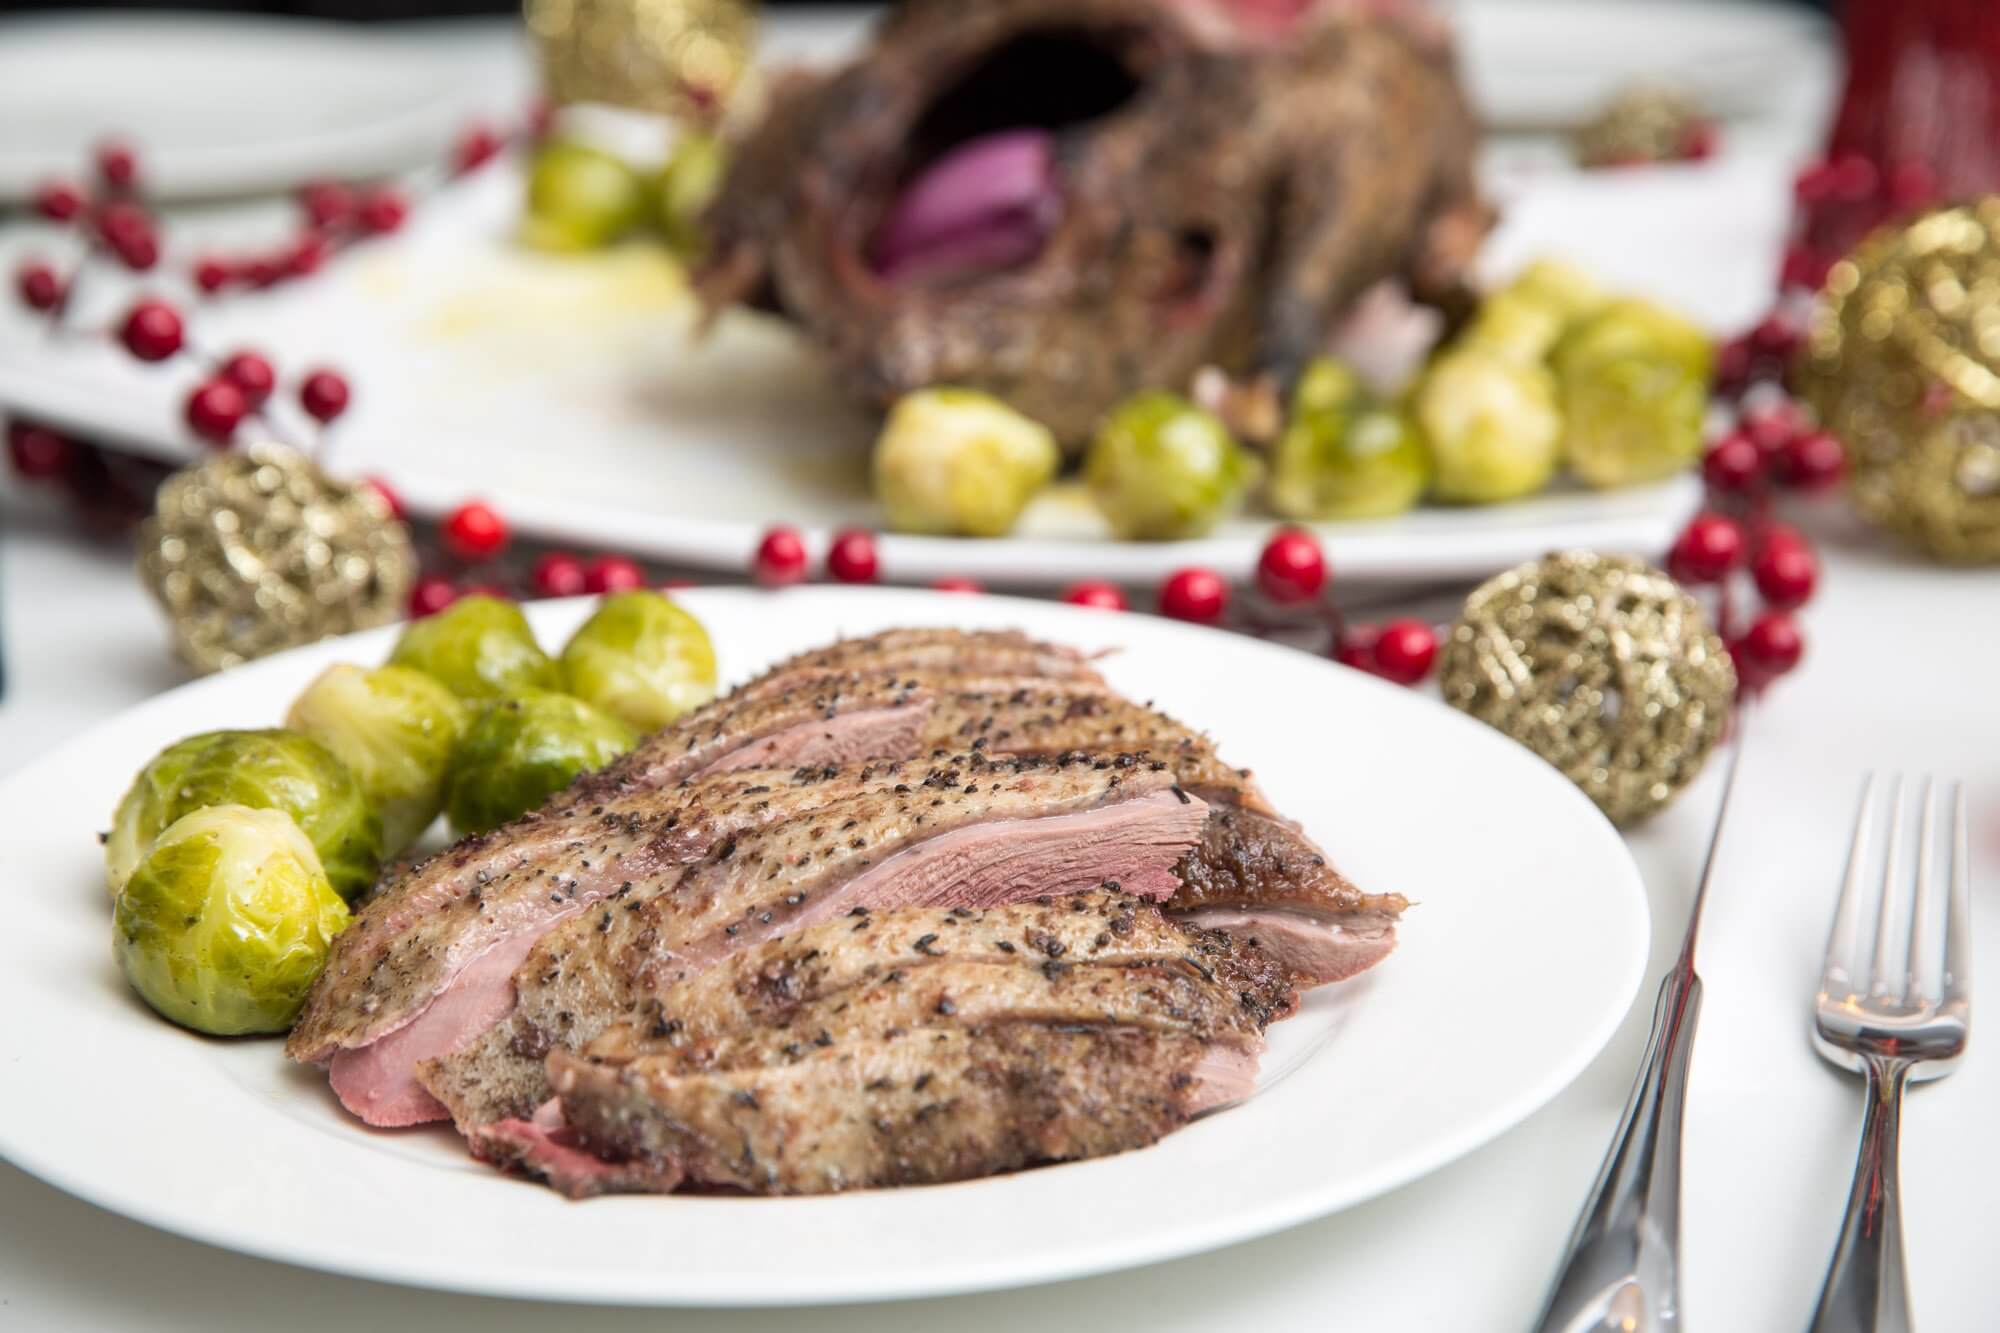 Roast Canada Goose with brussels sprouts